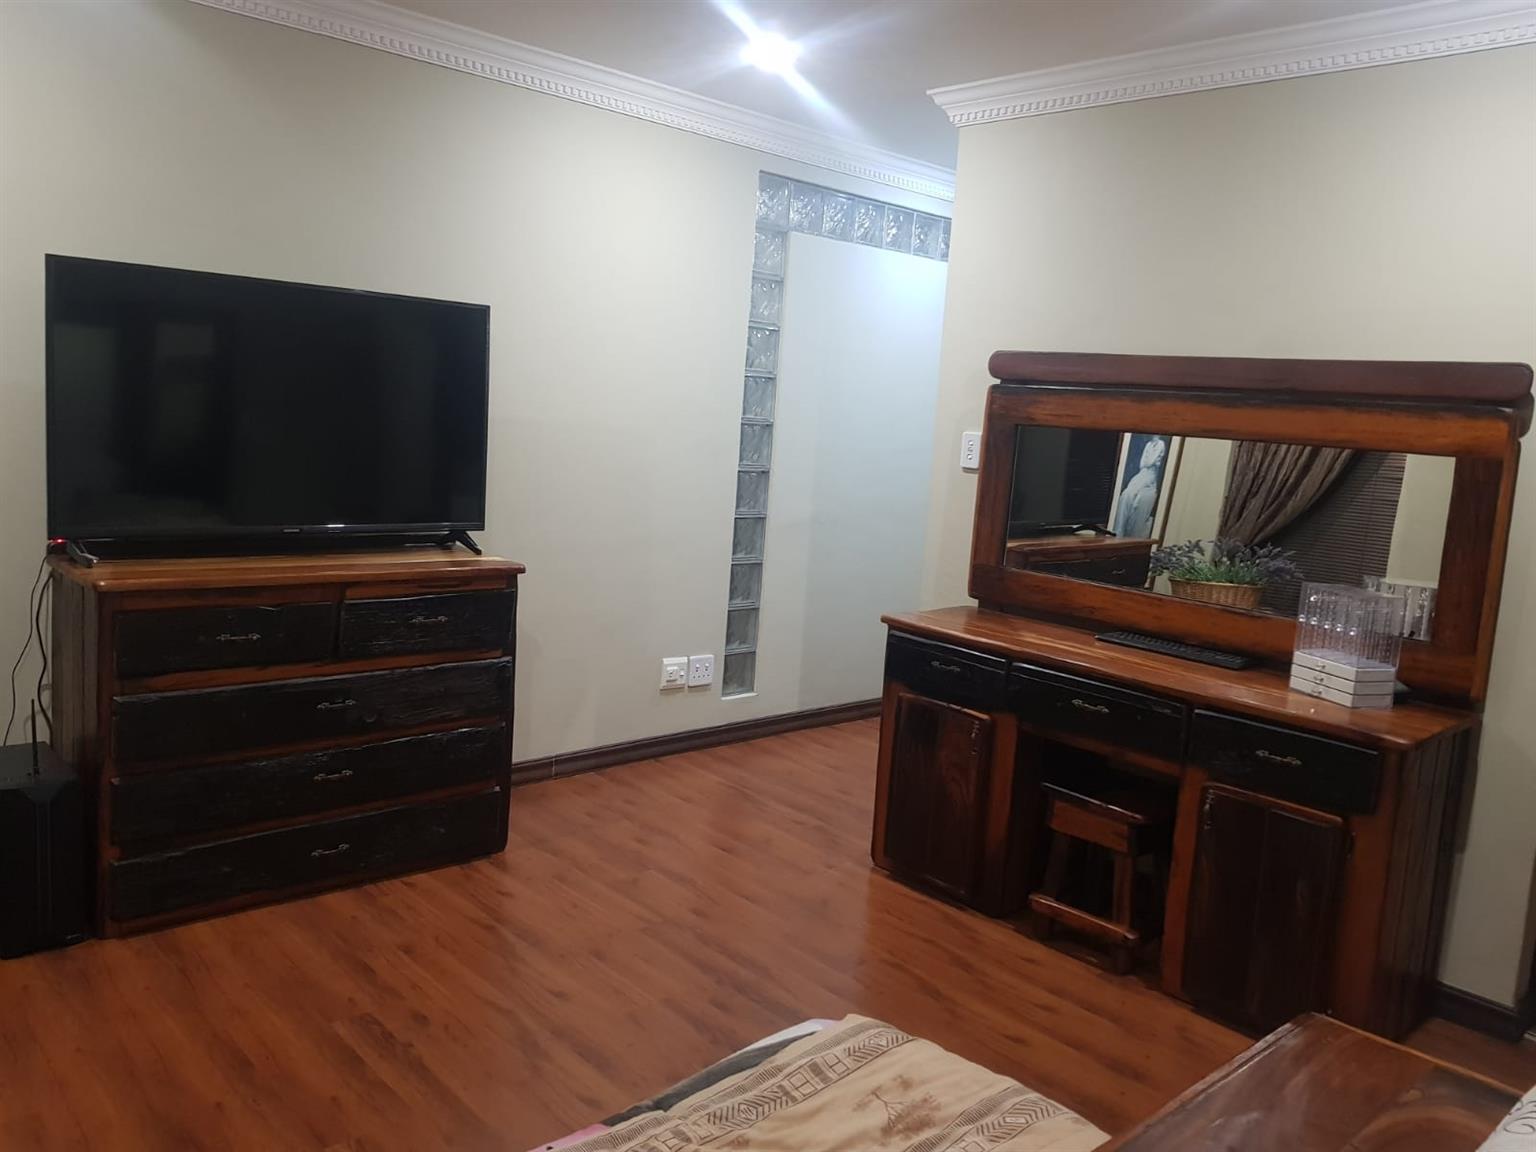 Bedroom suite and Mirror and Lounge furniture and many more